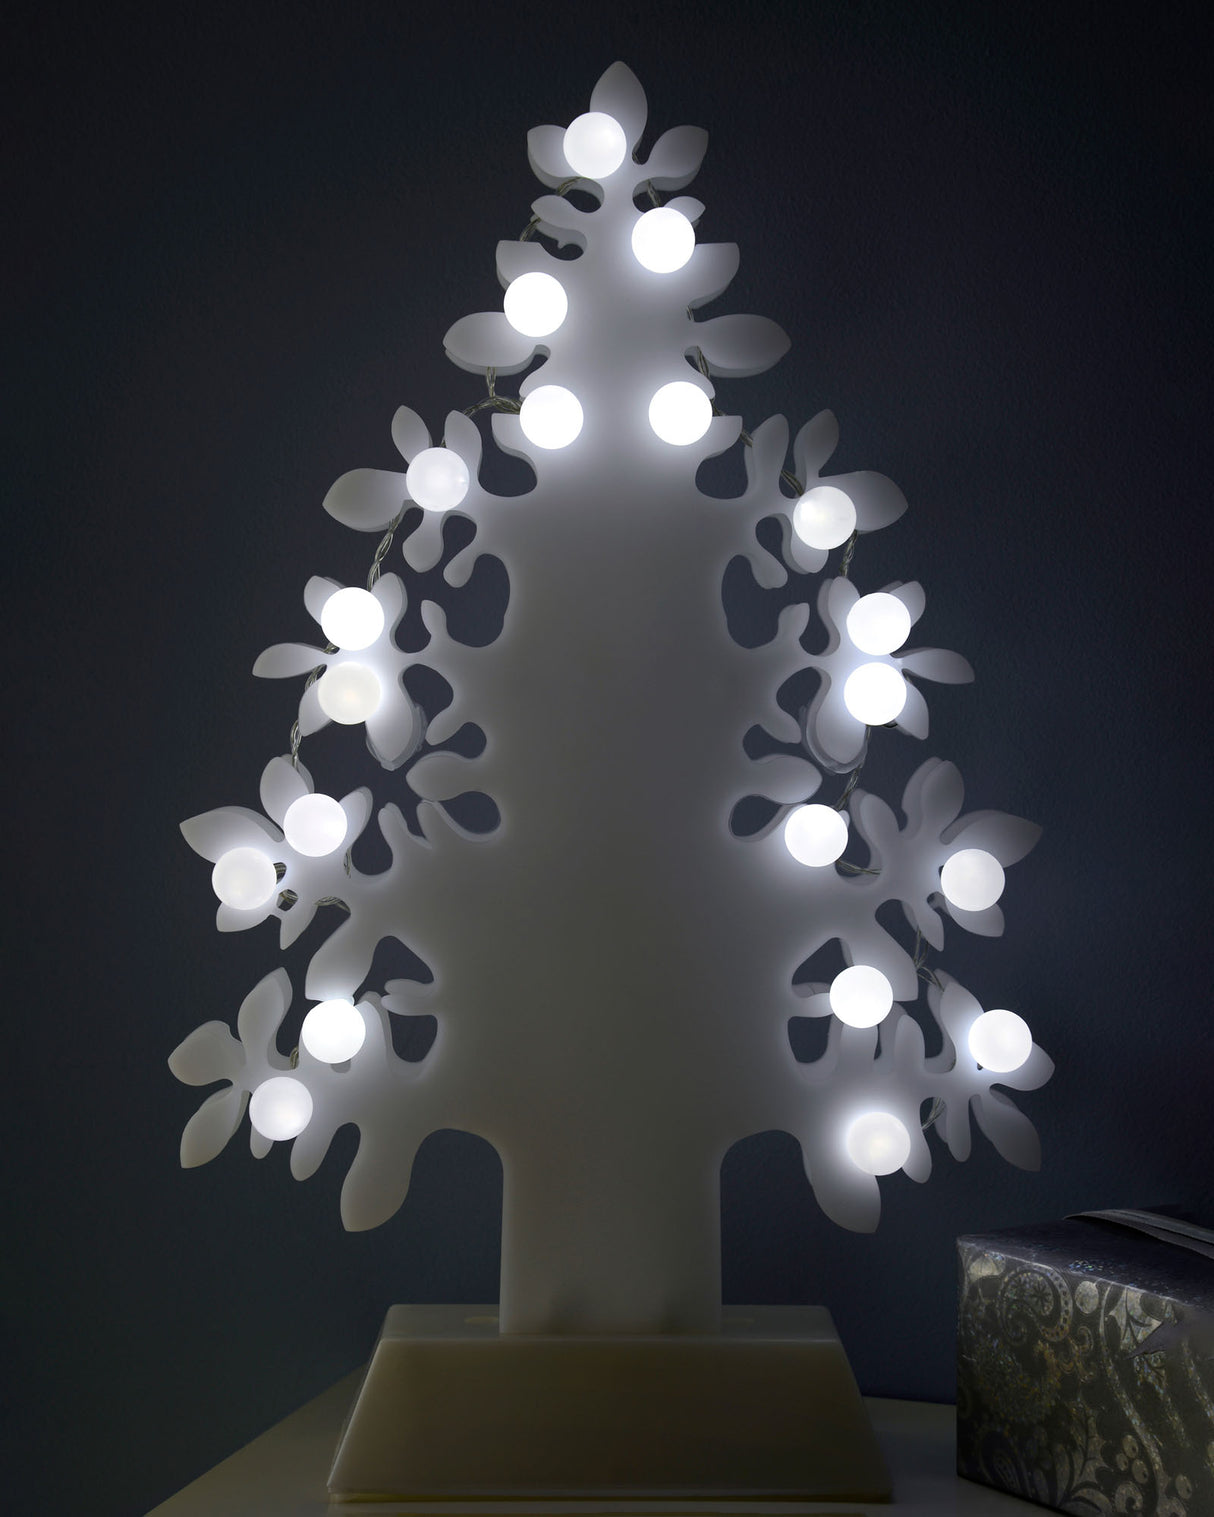 45 cm Christmas Tree Decoration with 20 LED Lights, Bright White